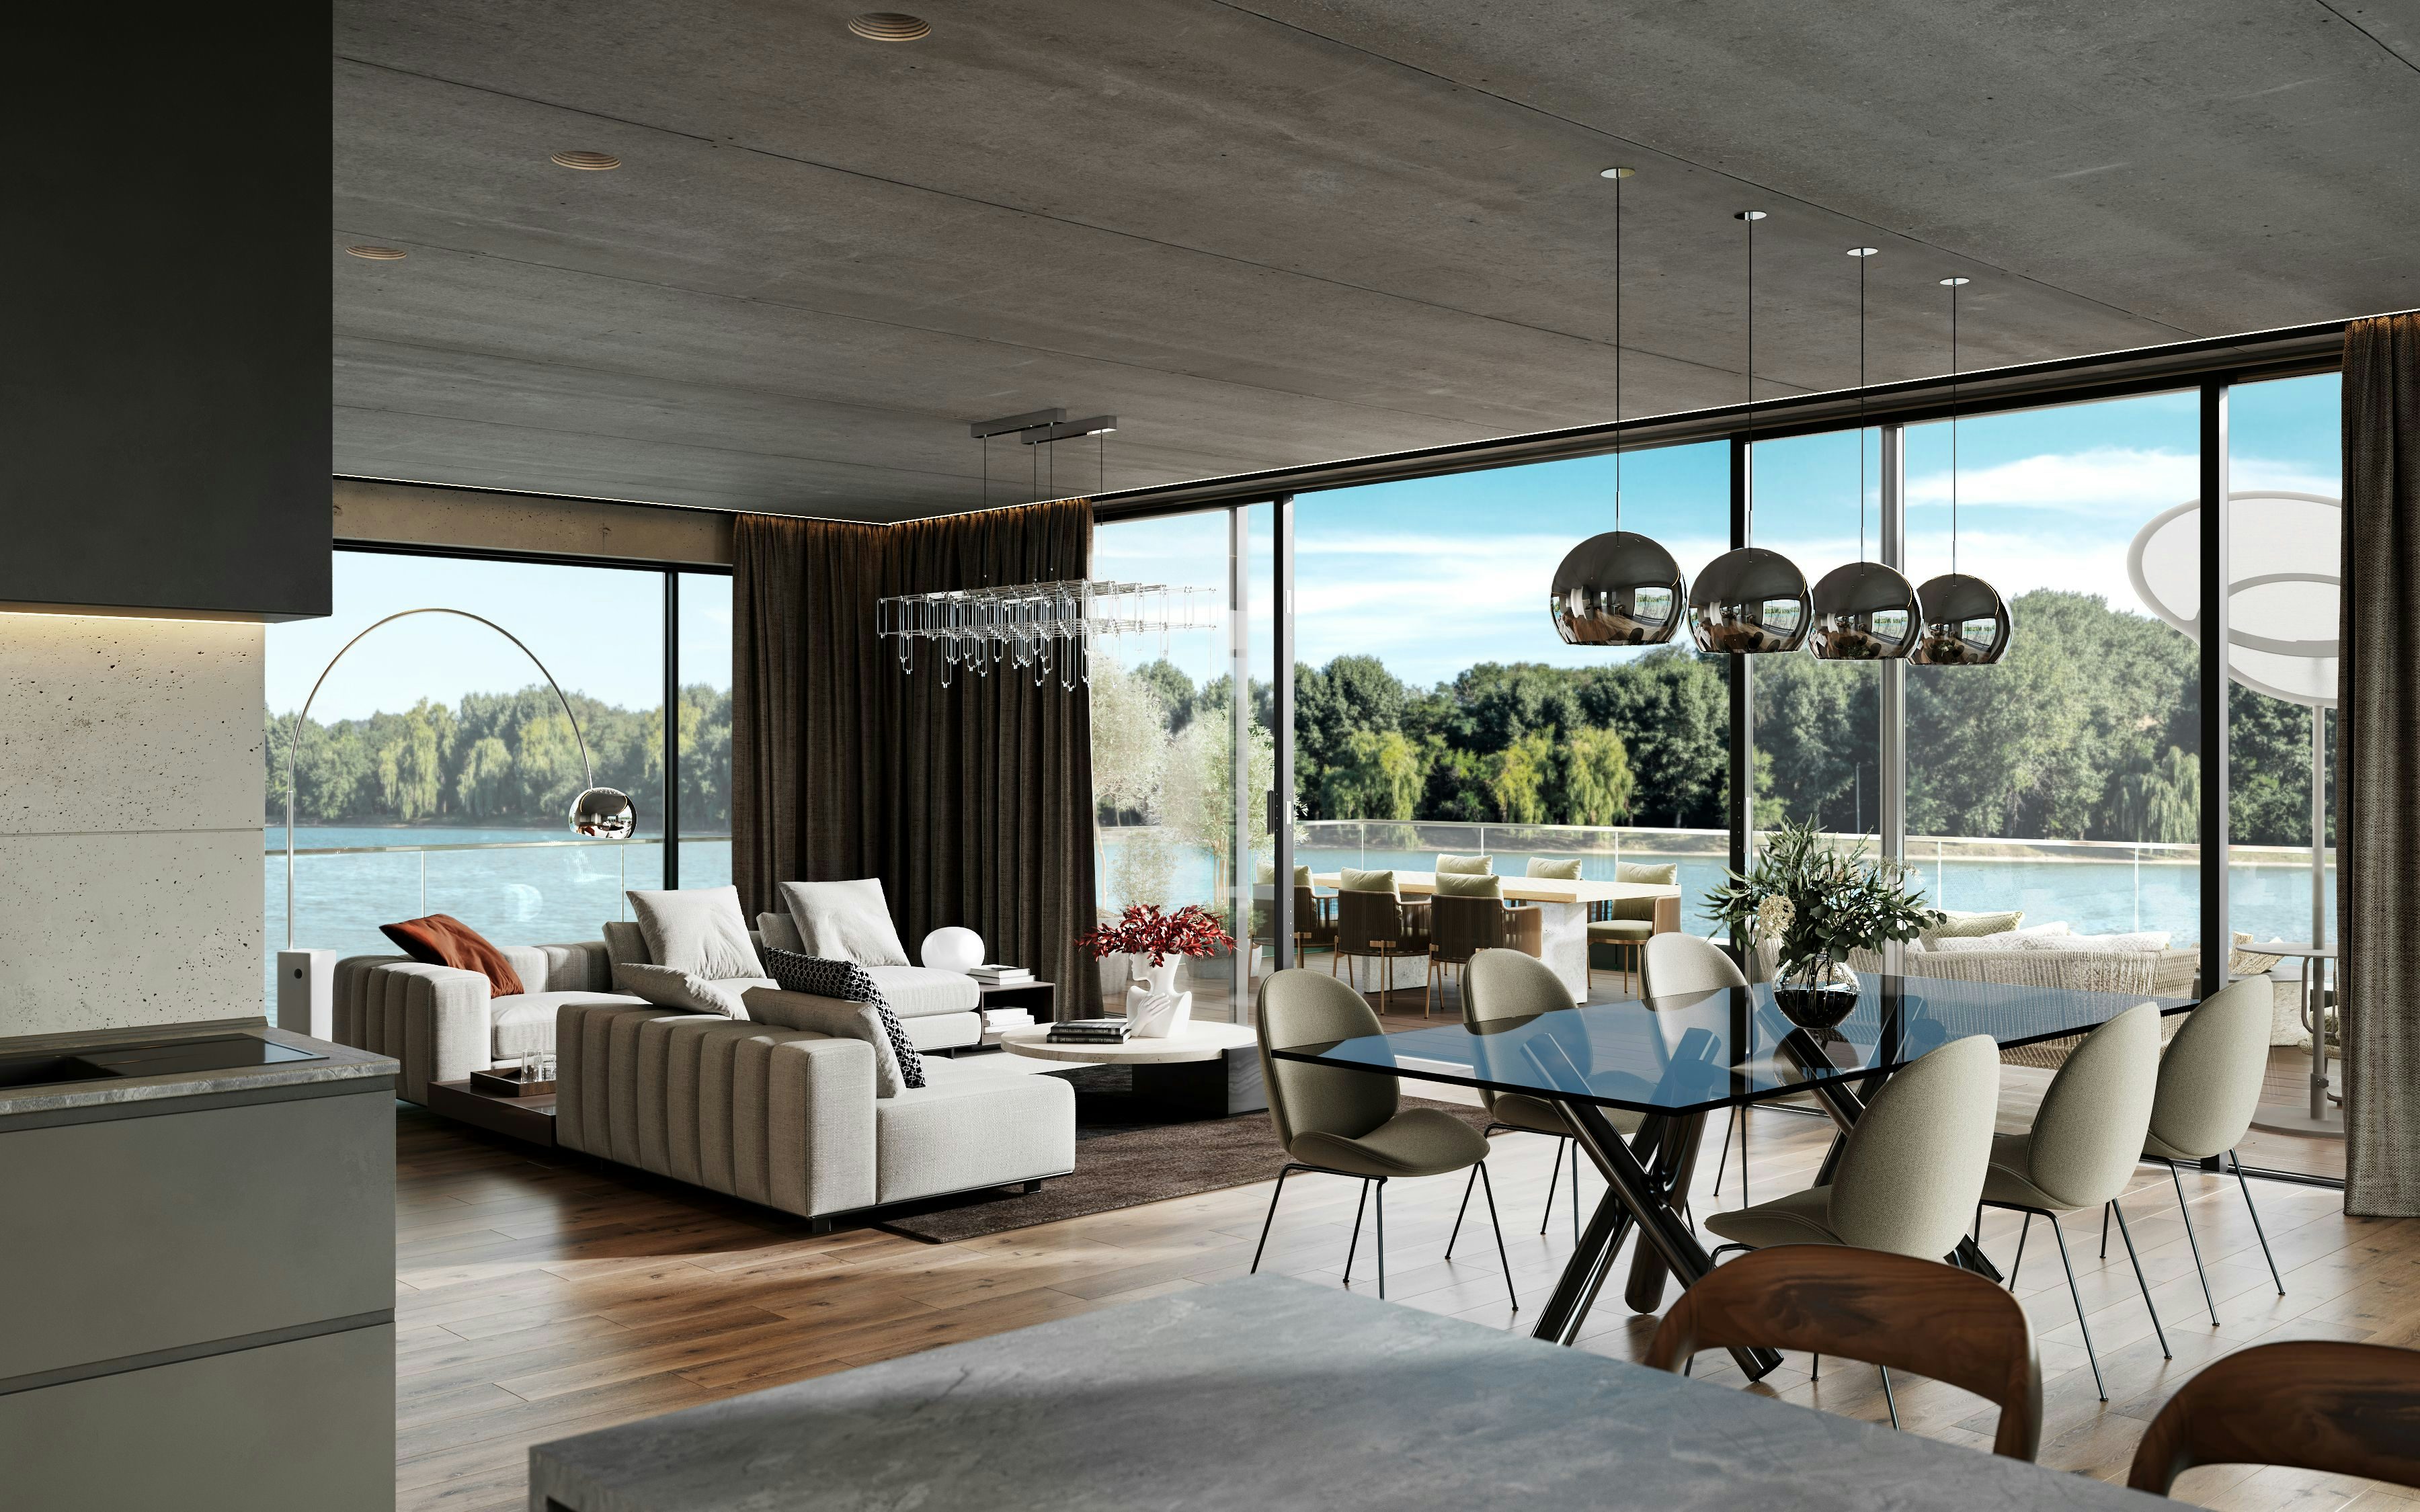 3D Interior Architectural Visualization of the luxurious apartment with the open space layout and modern furniture on the Tegel lake in Berlin Germany